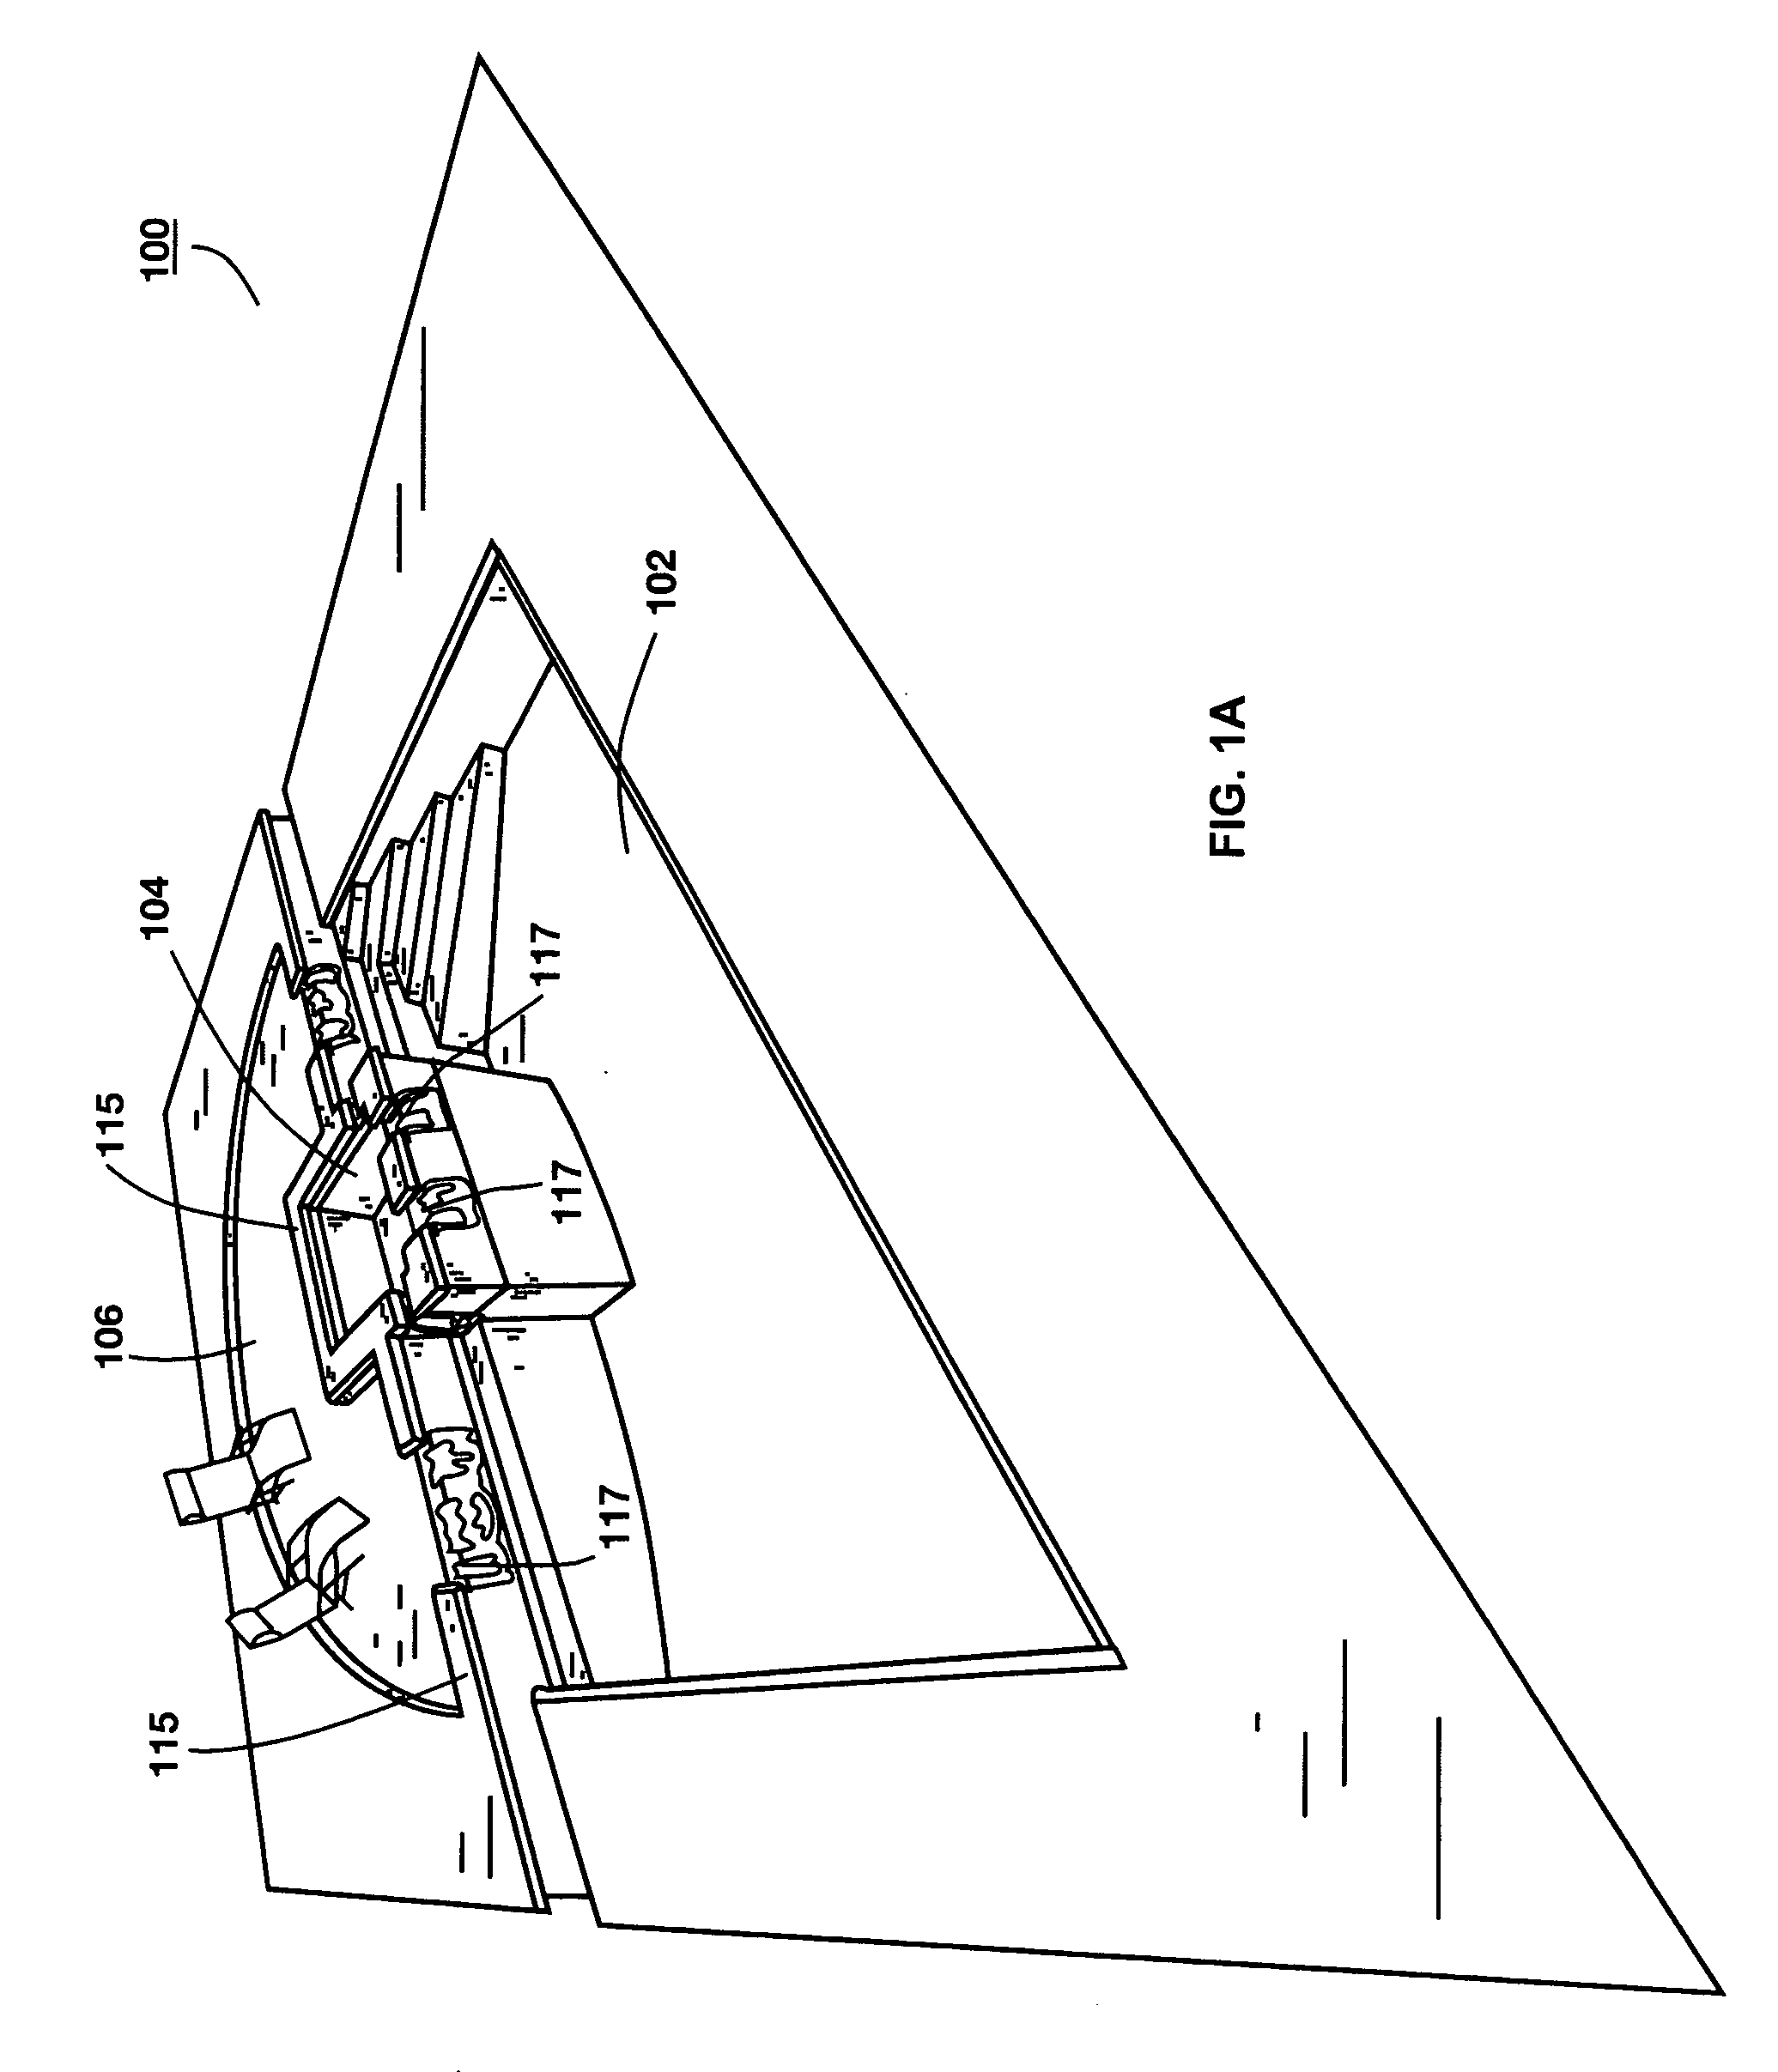 Integrated poolscape comprised of pre-fabricated elements and related methods